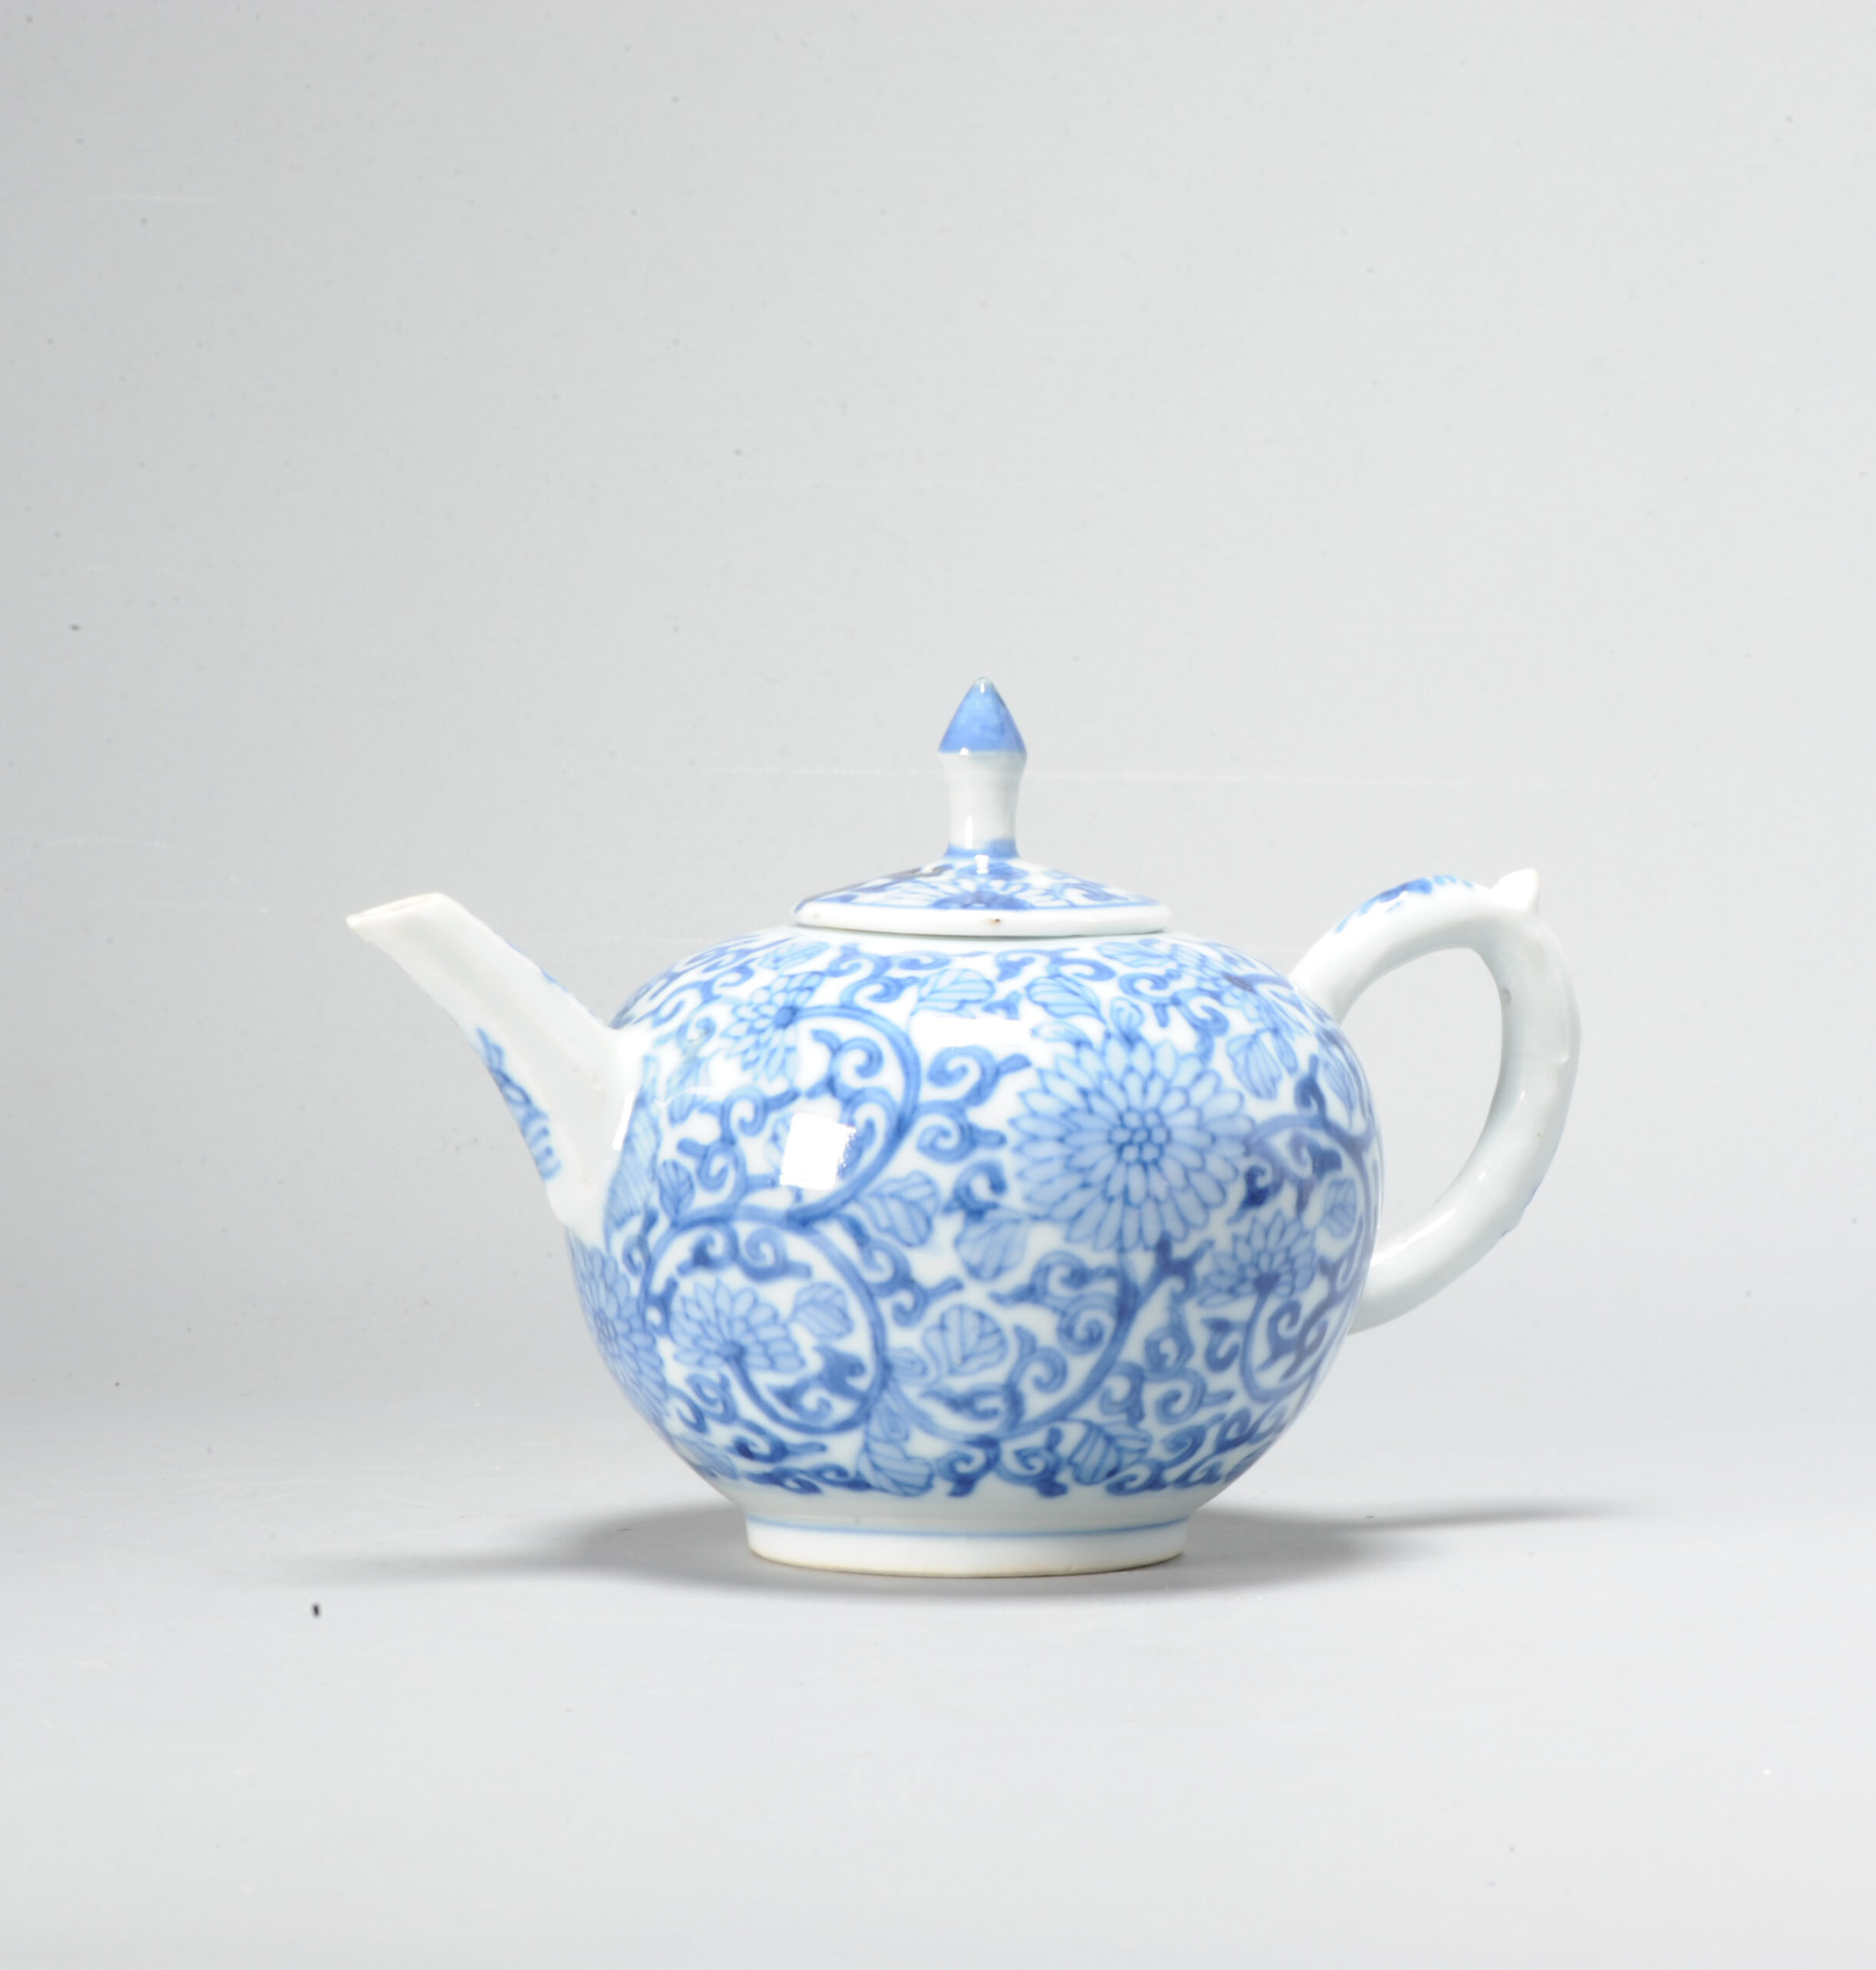 Antique Chinese Porcelain Kangxi period Teapot Nice Blue and White Decoration